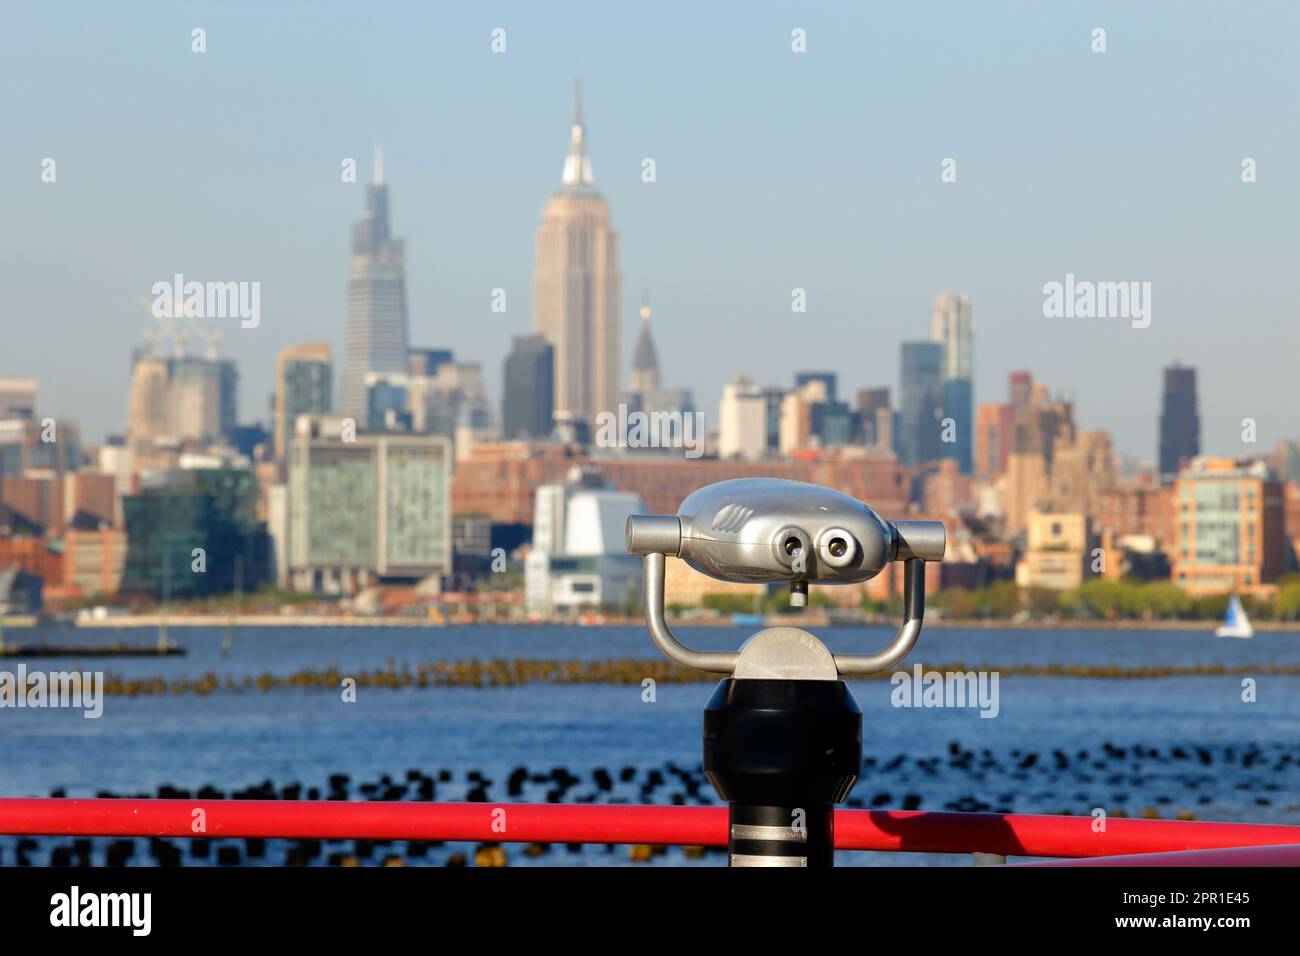 Hi Spy viewing binoculars aimed toward the New York City skyline with the Empire State Building in Midtown Manhattan at its center. Stock Photo